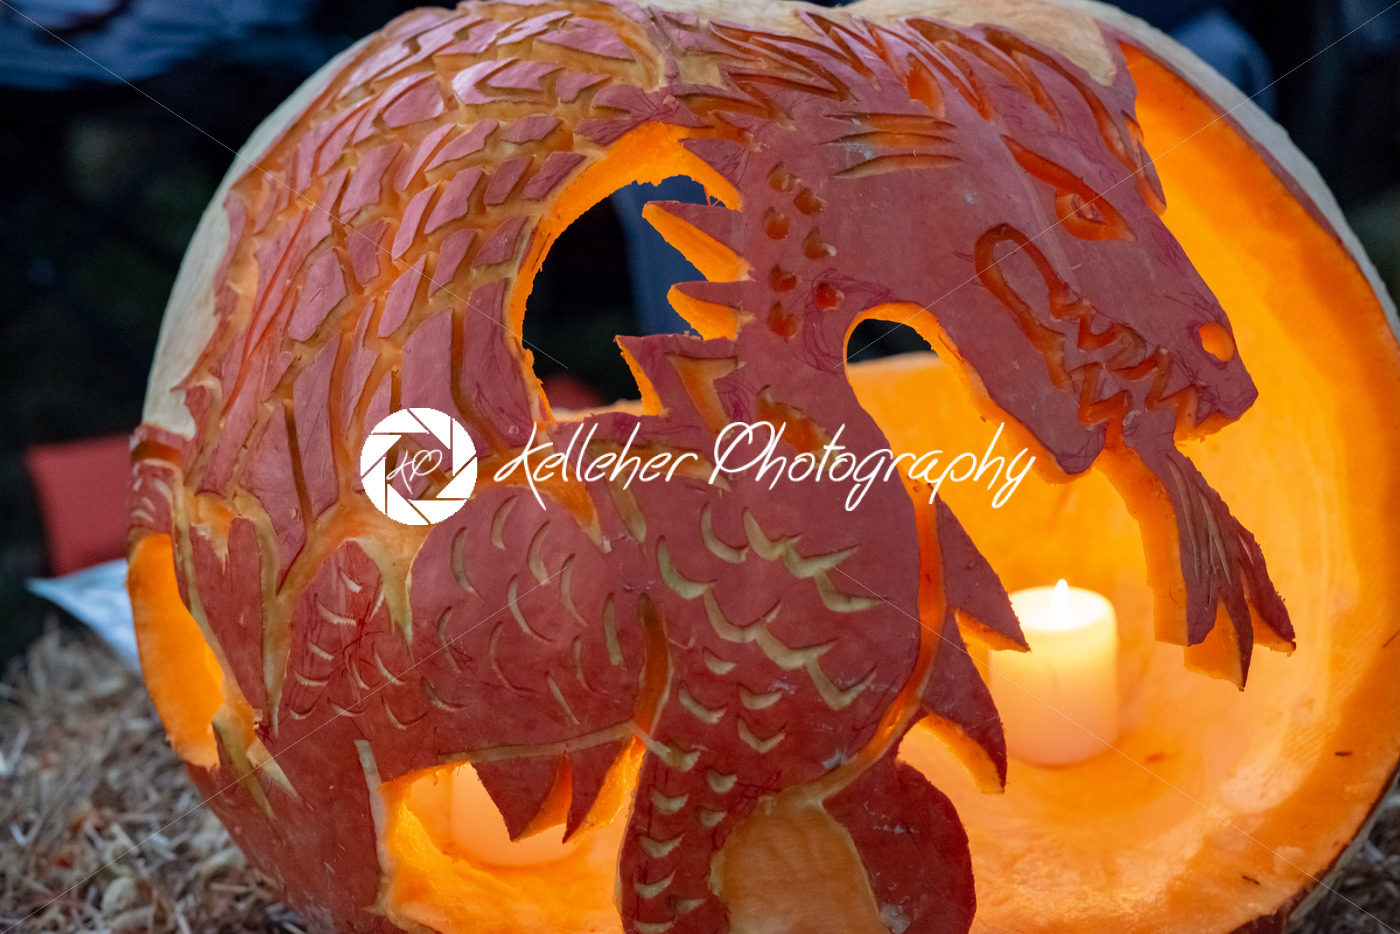 CHADDS FORD, PA – OCTOBER 18: Dragon at The Great Pumpkin Carve carving contest on October 18, 2018 - Kelleher Photography Store